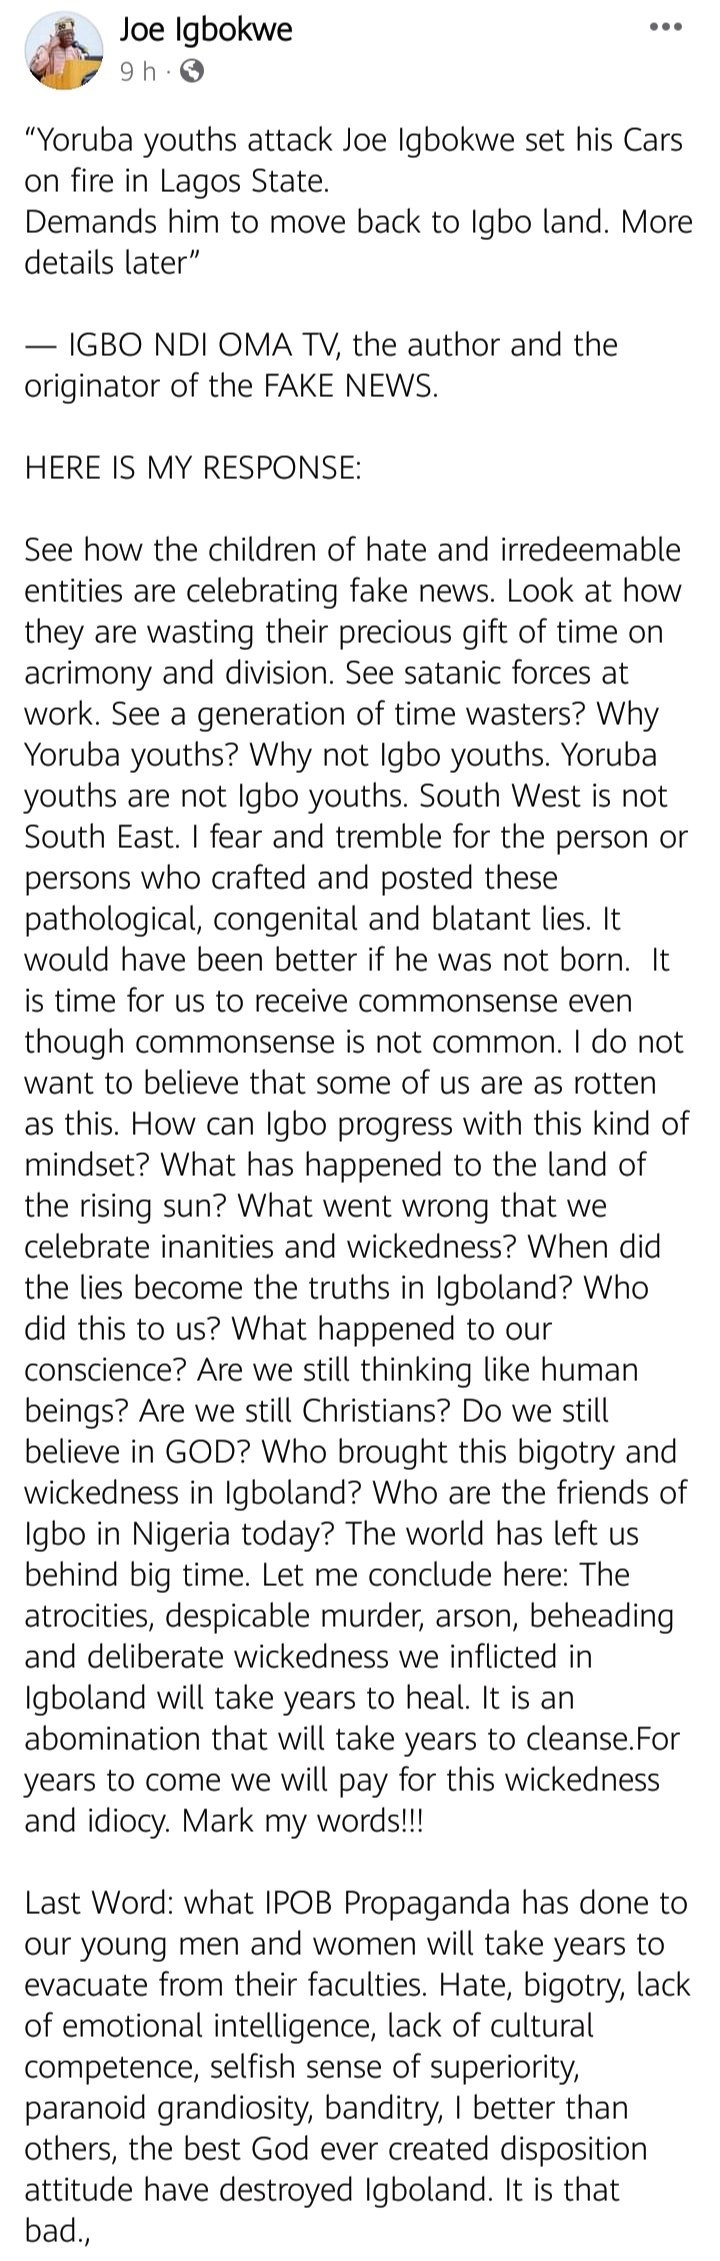 For Years To Come, Igbos Will Pay For Their Wickedness And Idiocy, Just Mark My Word - Joe Igbokwe